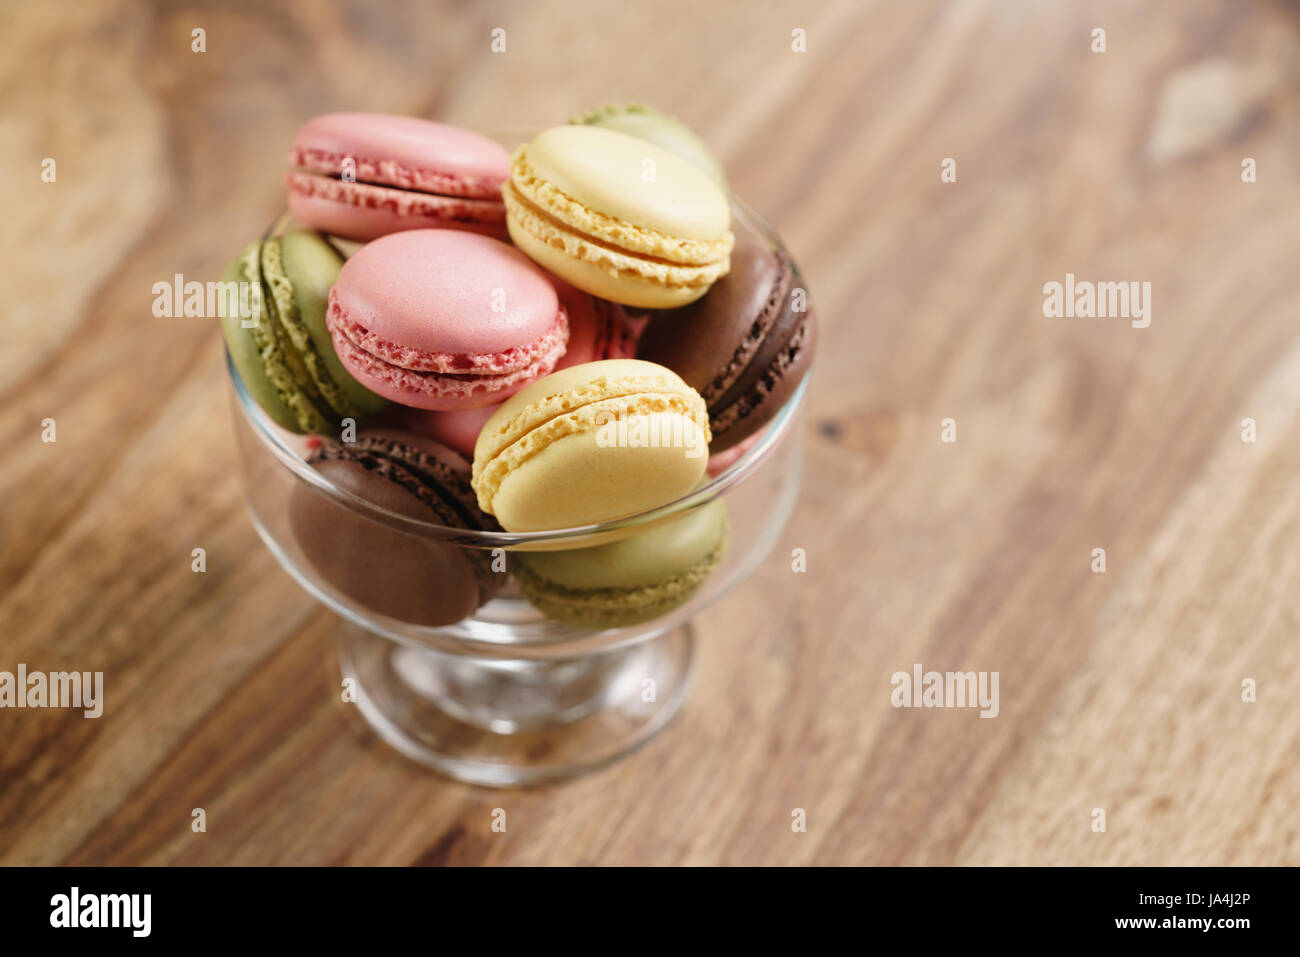 assorted macarons in glass bowl on wood table from above Stock Photo